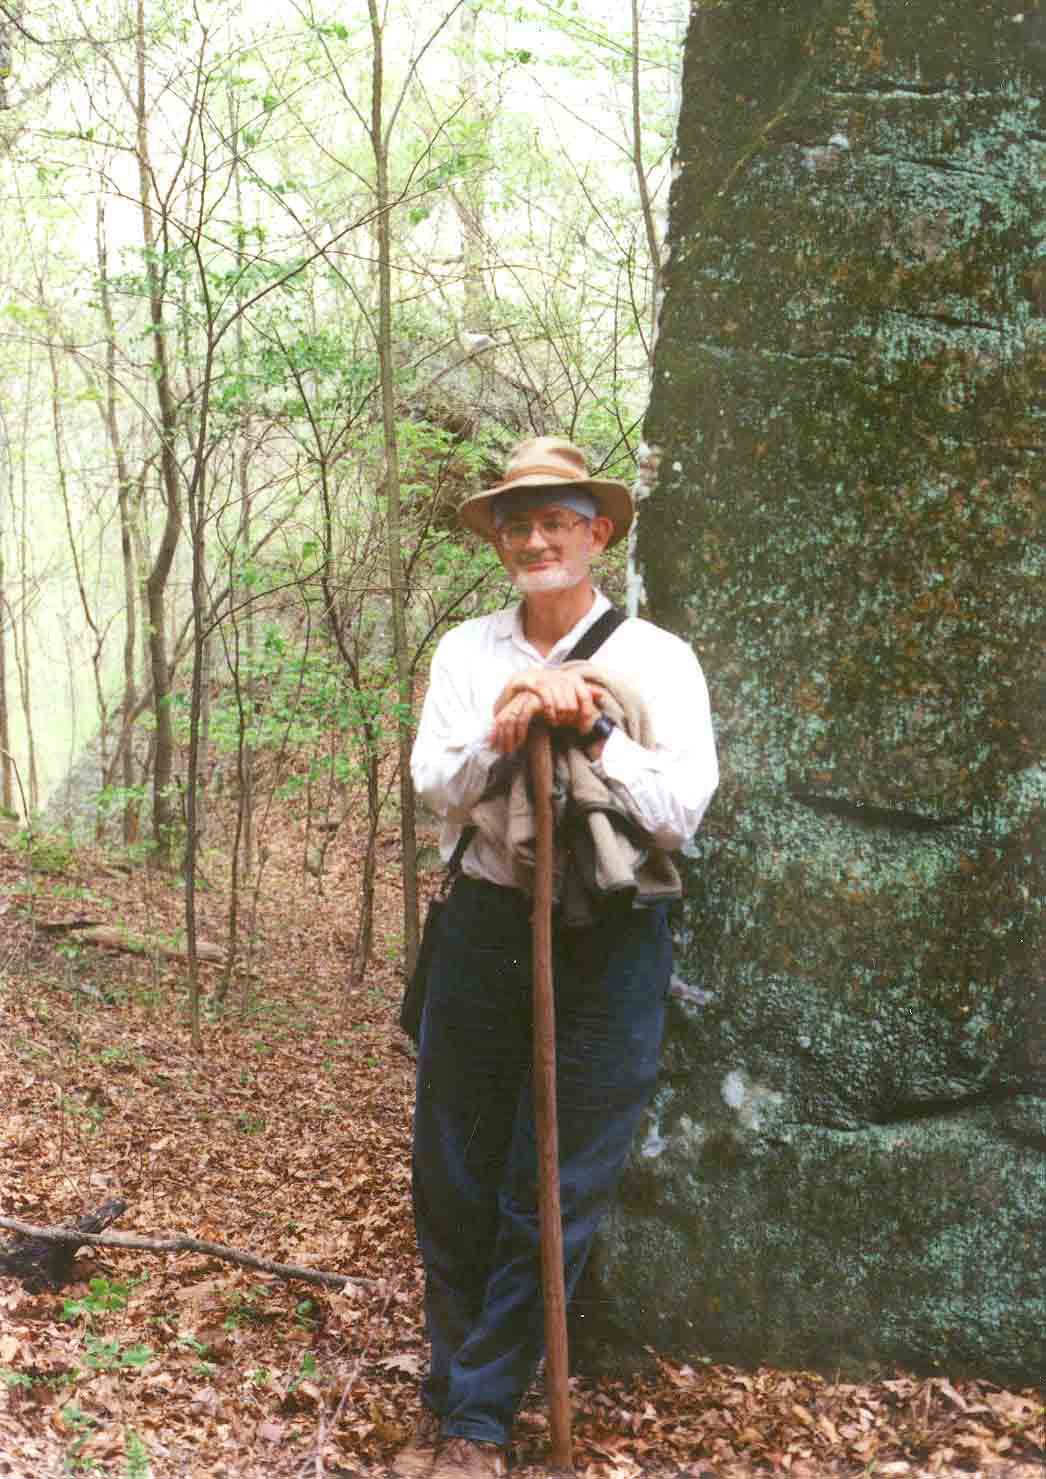 David King in natural habitat, standing with walking stick beside a tall rock.